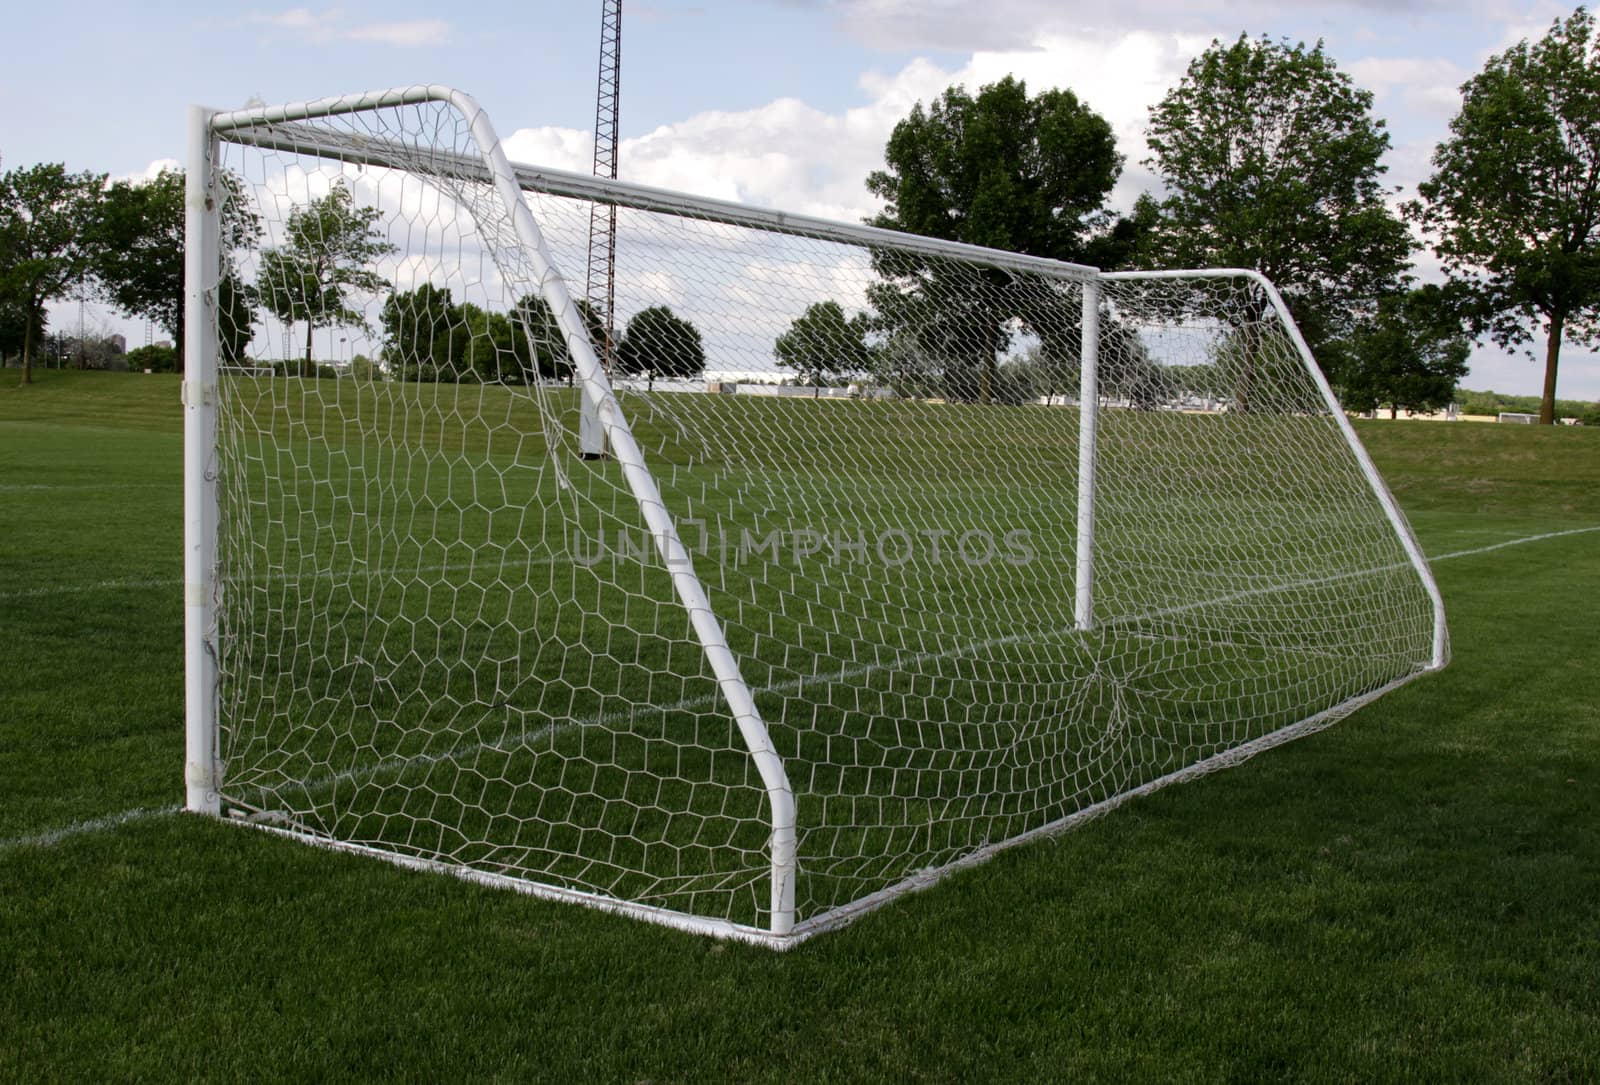 A view from behind the net on a soccer pitch.